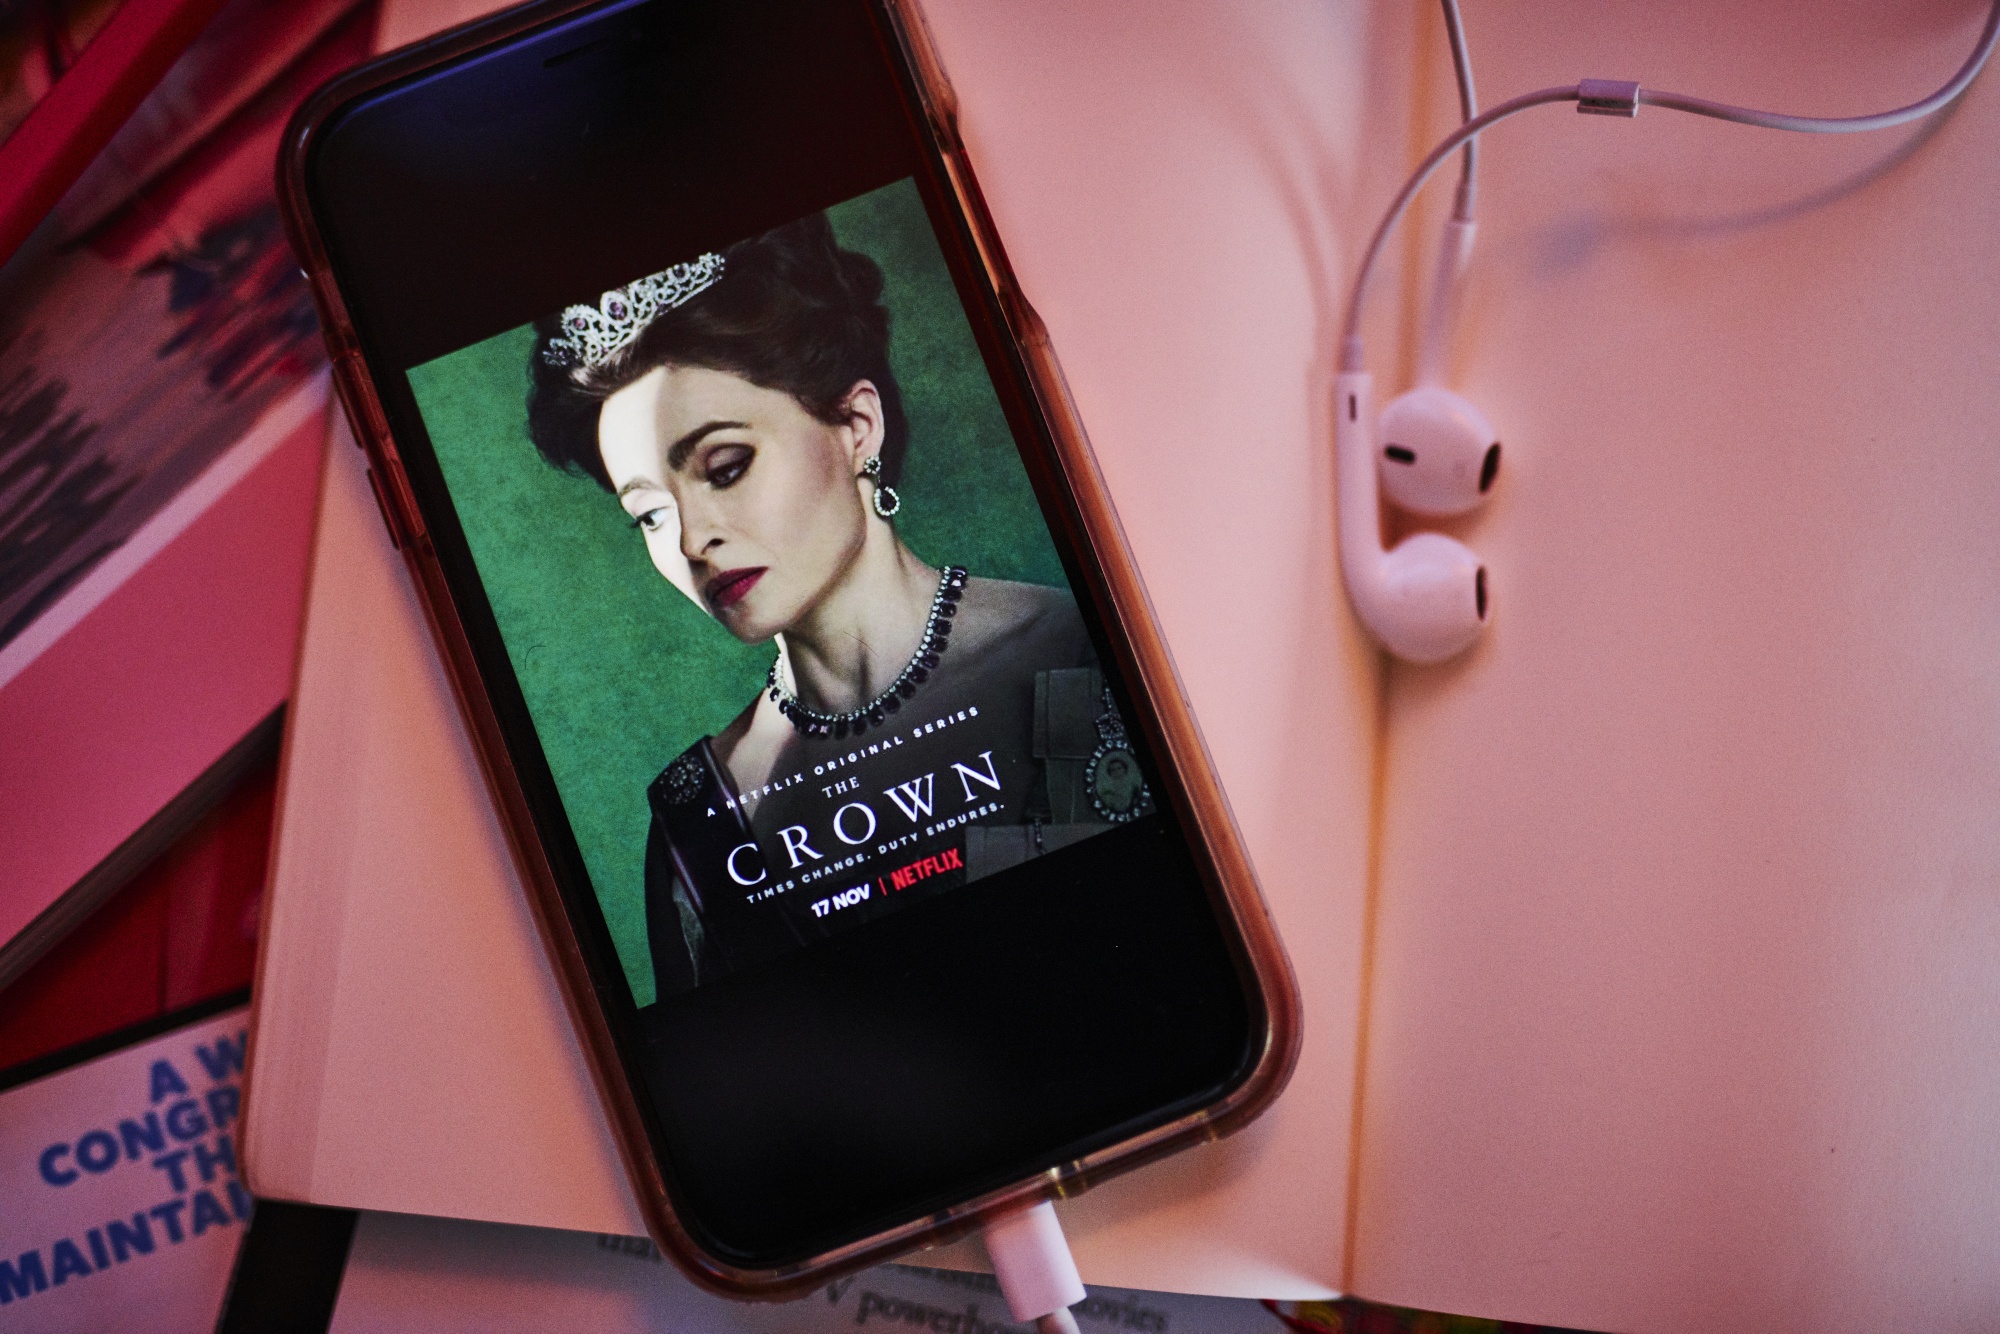 Netflix series &quot;The Crown&quot; is displayed on an iPhone.